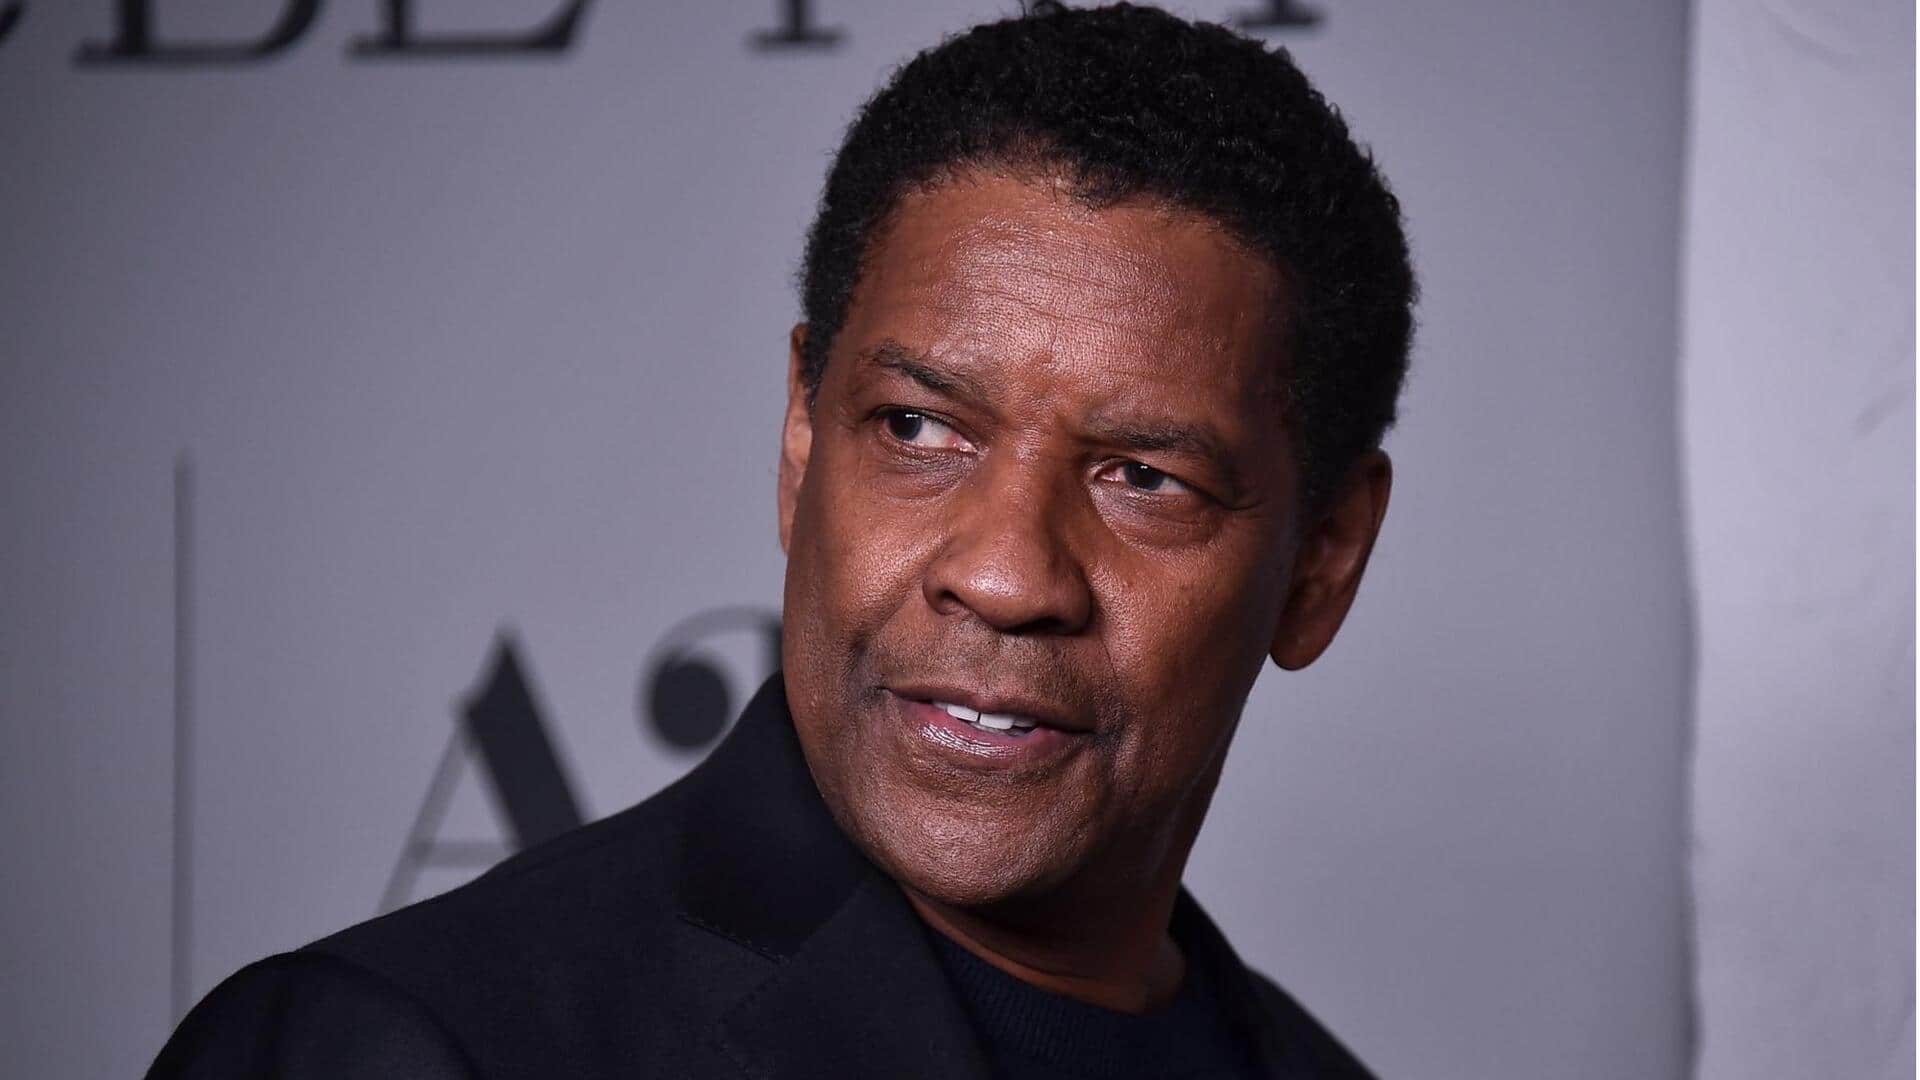 Explore Denzel Washington's most underrated films on actor's birthday